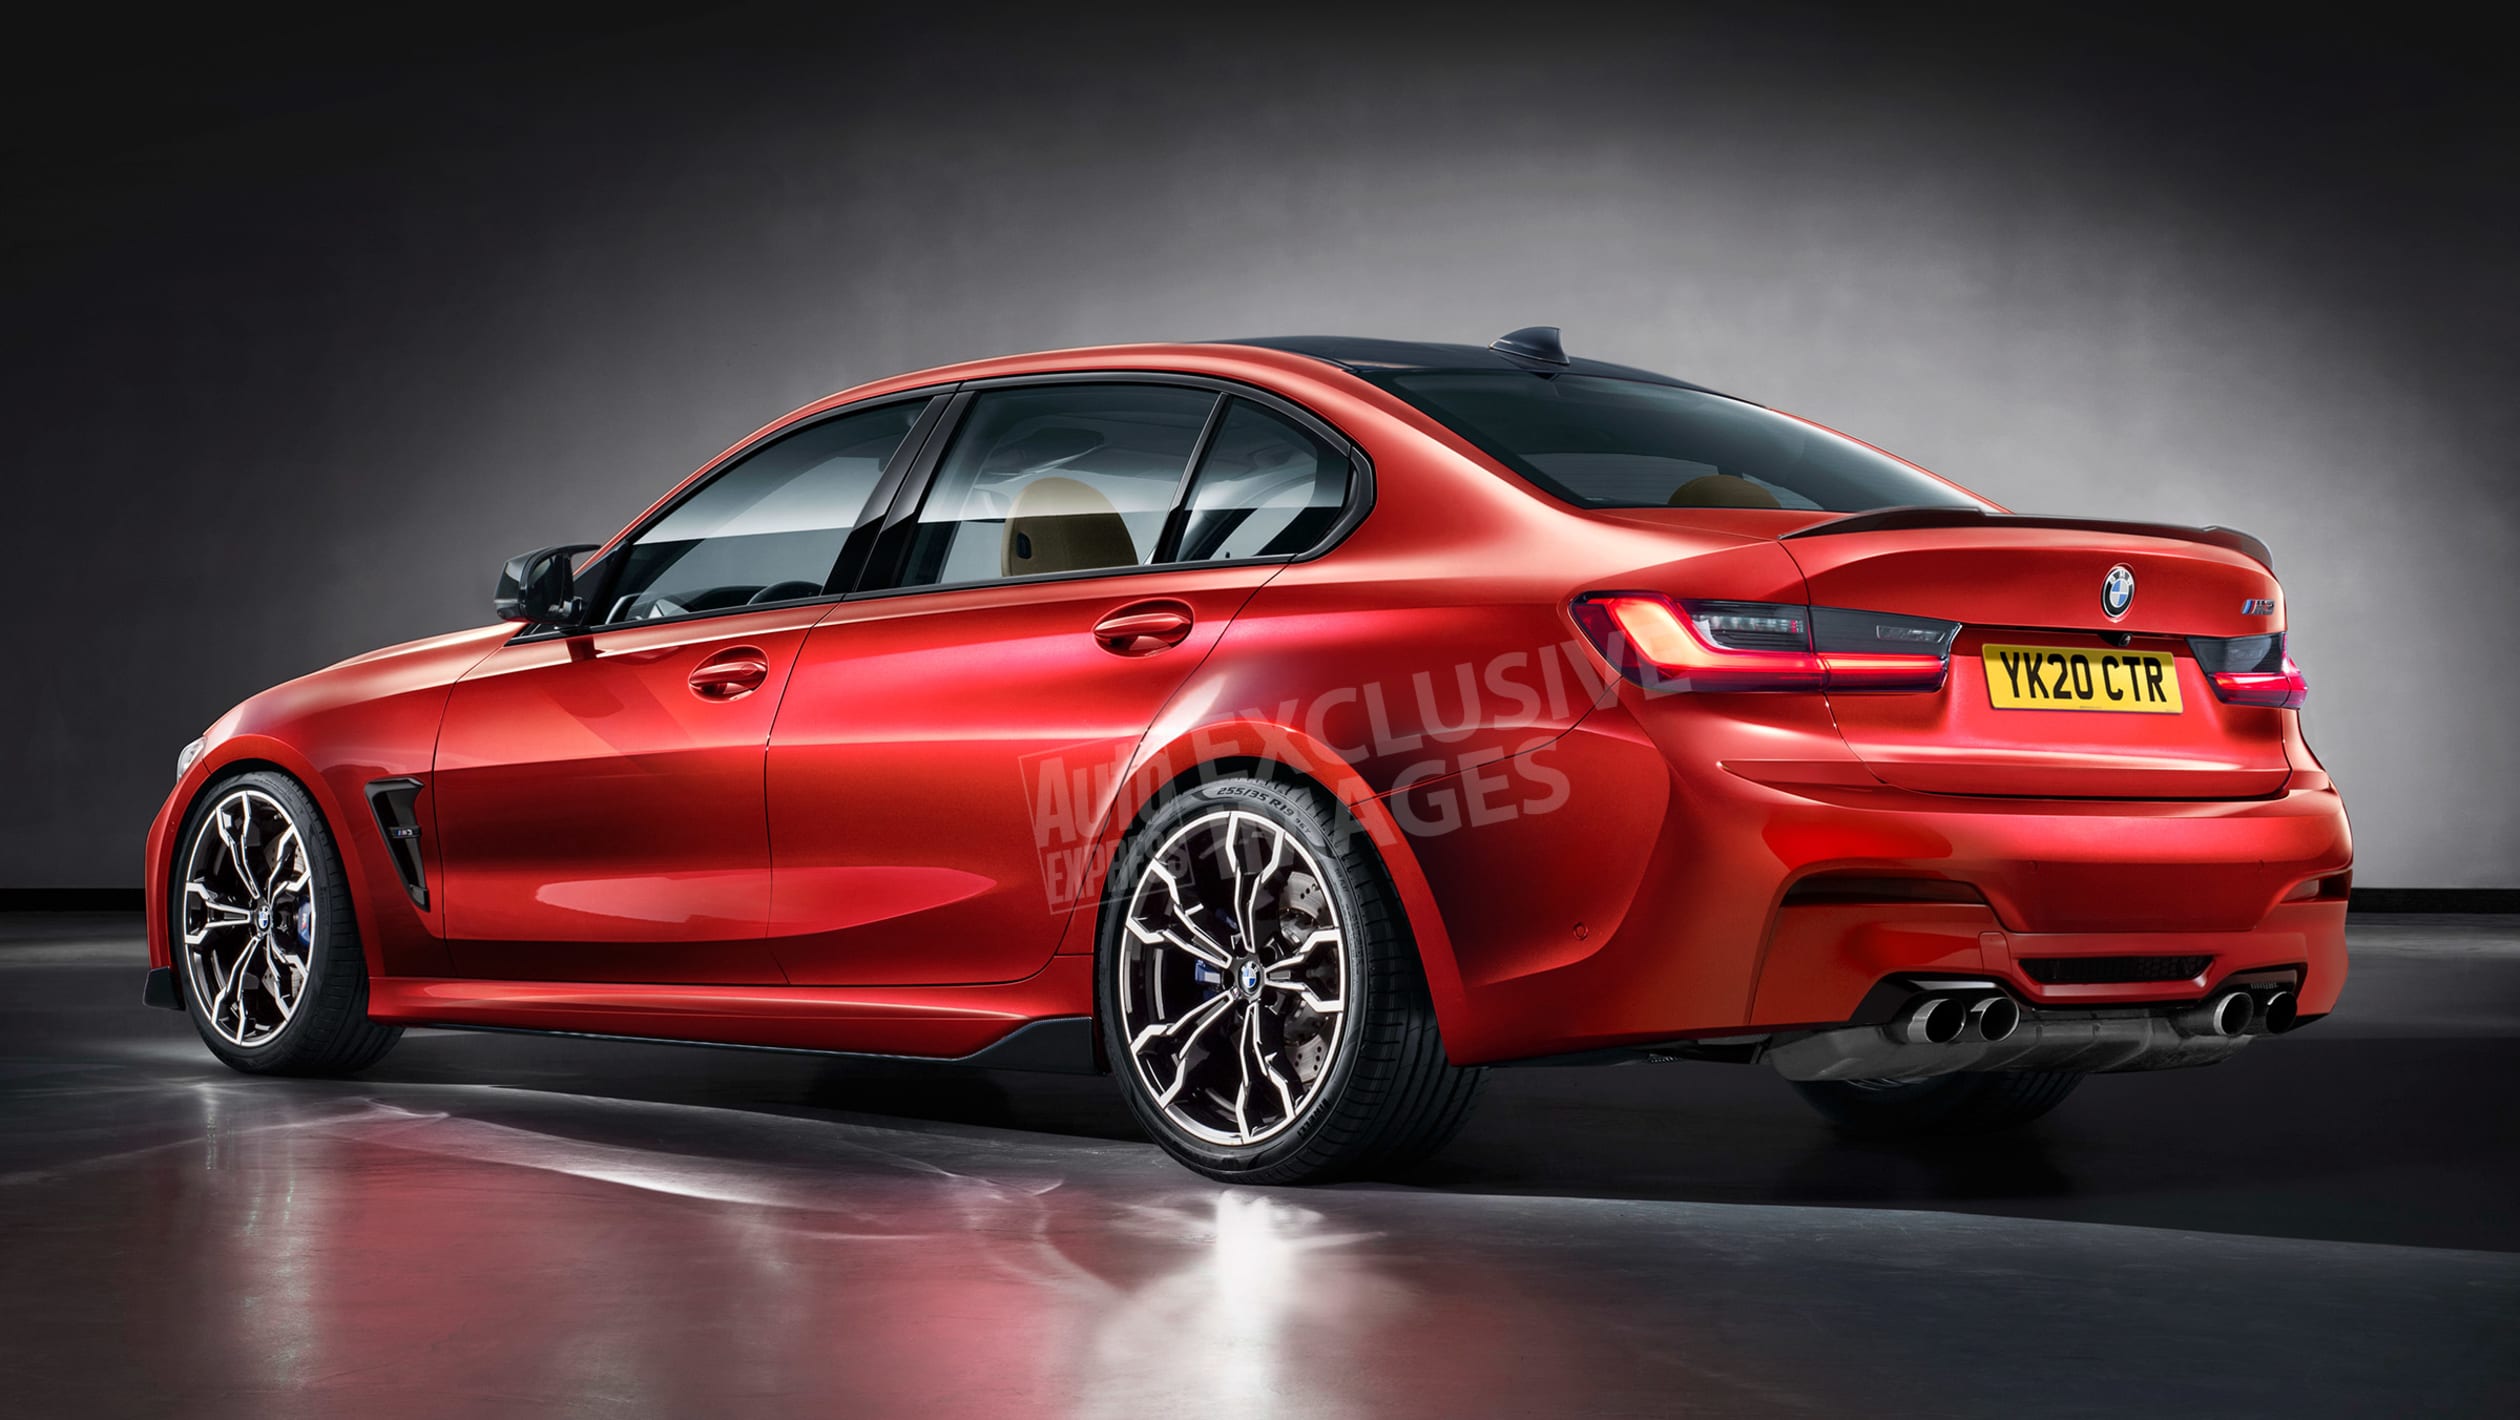 New 2019 BMW M3 to boast 510bhp and four-wheel drive - pictures | Auto ...